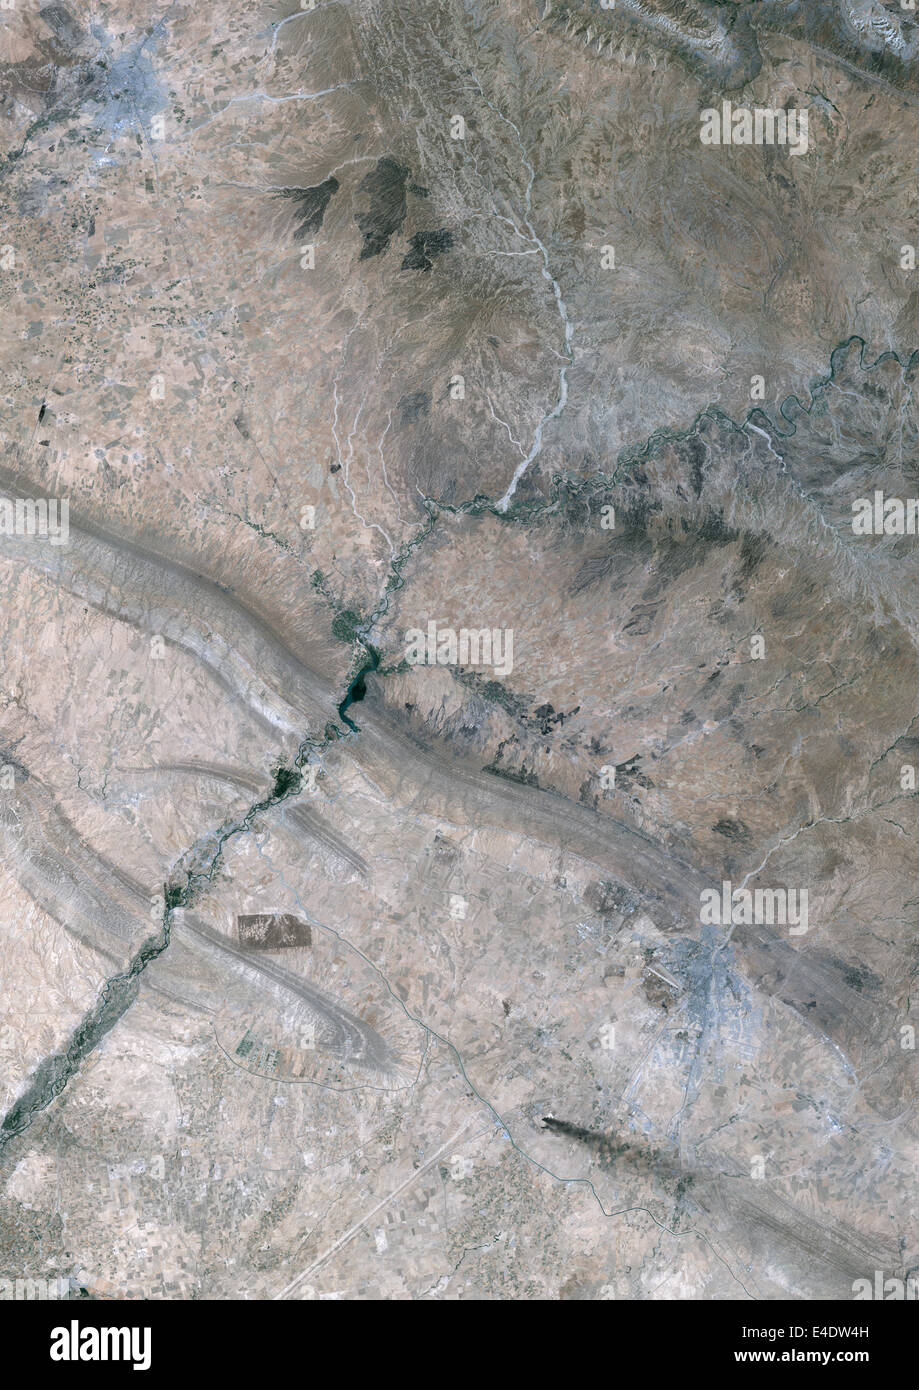 Oil Extraction, Kirkouk, Iraq, True Colour Satellite Image. Oil extraction in the region of Kirkouk, 250 km North of Baghdad ; d Stock Photo